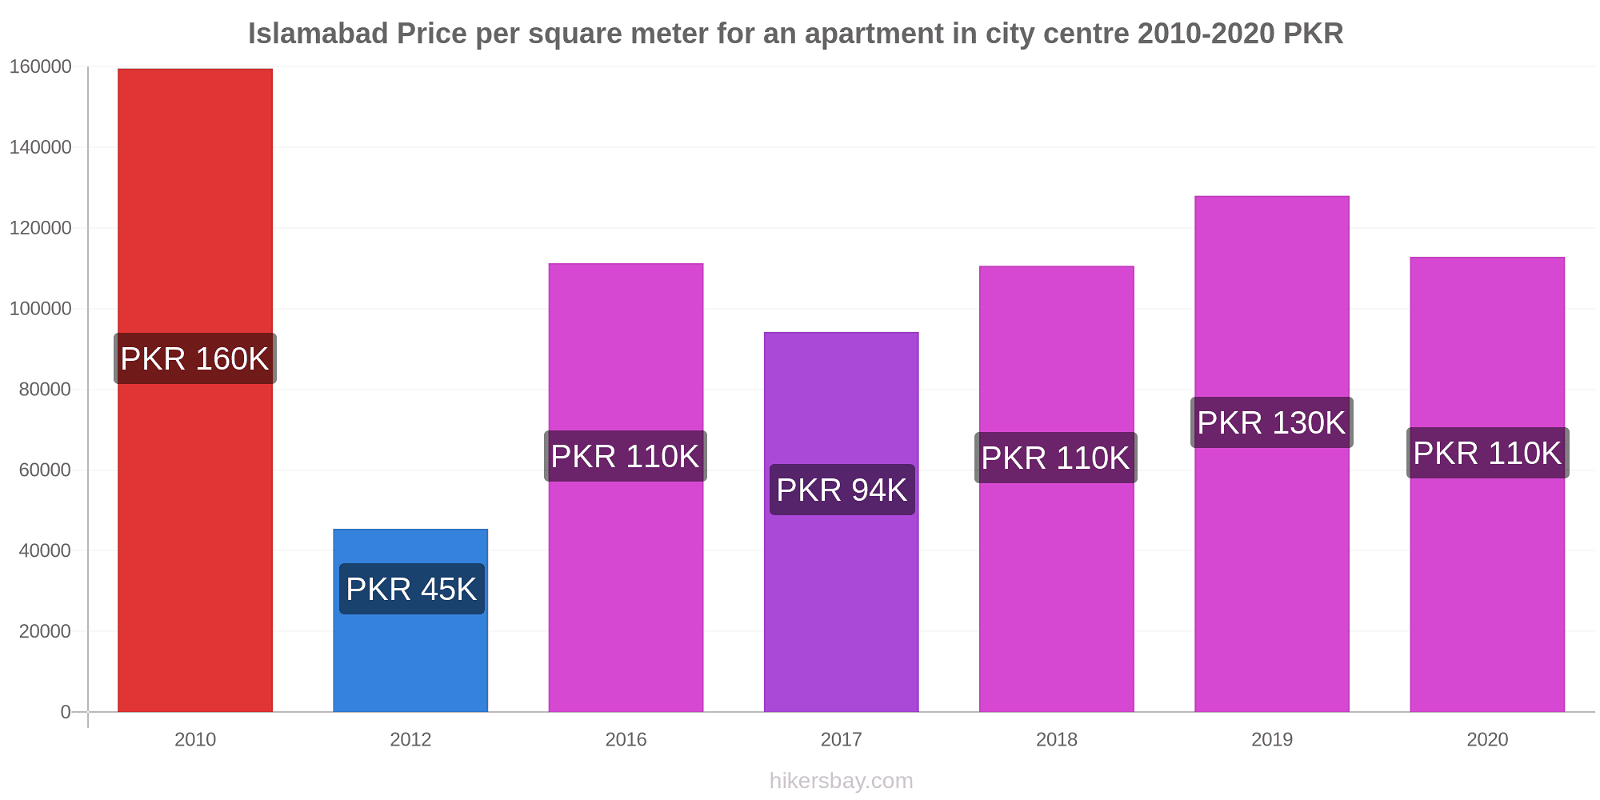 Islamabad price changes Price per square meter for an apartment in city centre hikersbay.com